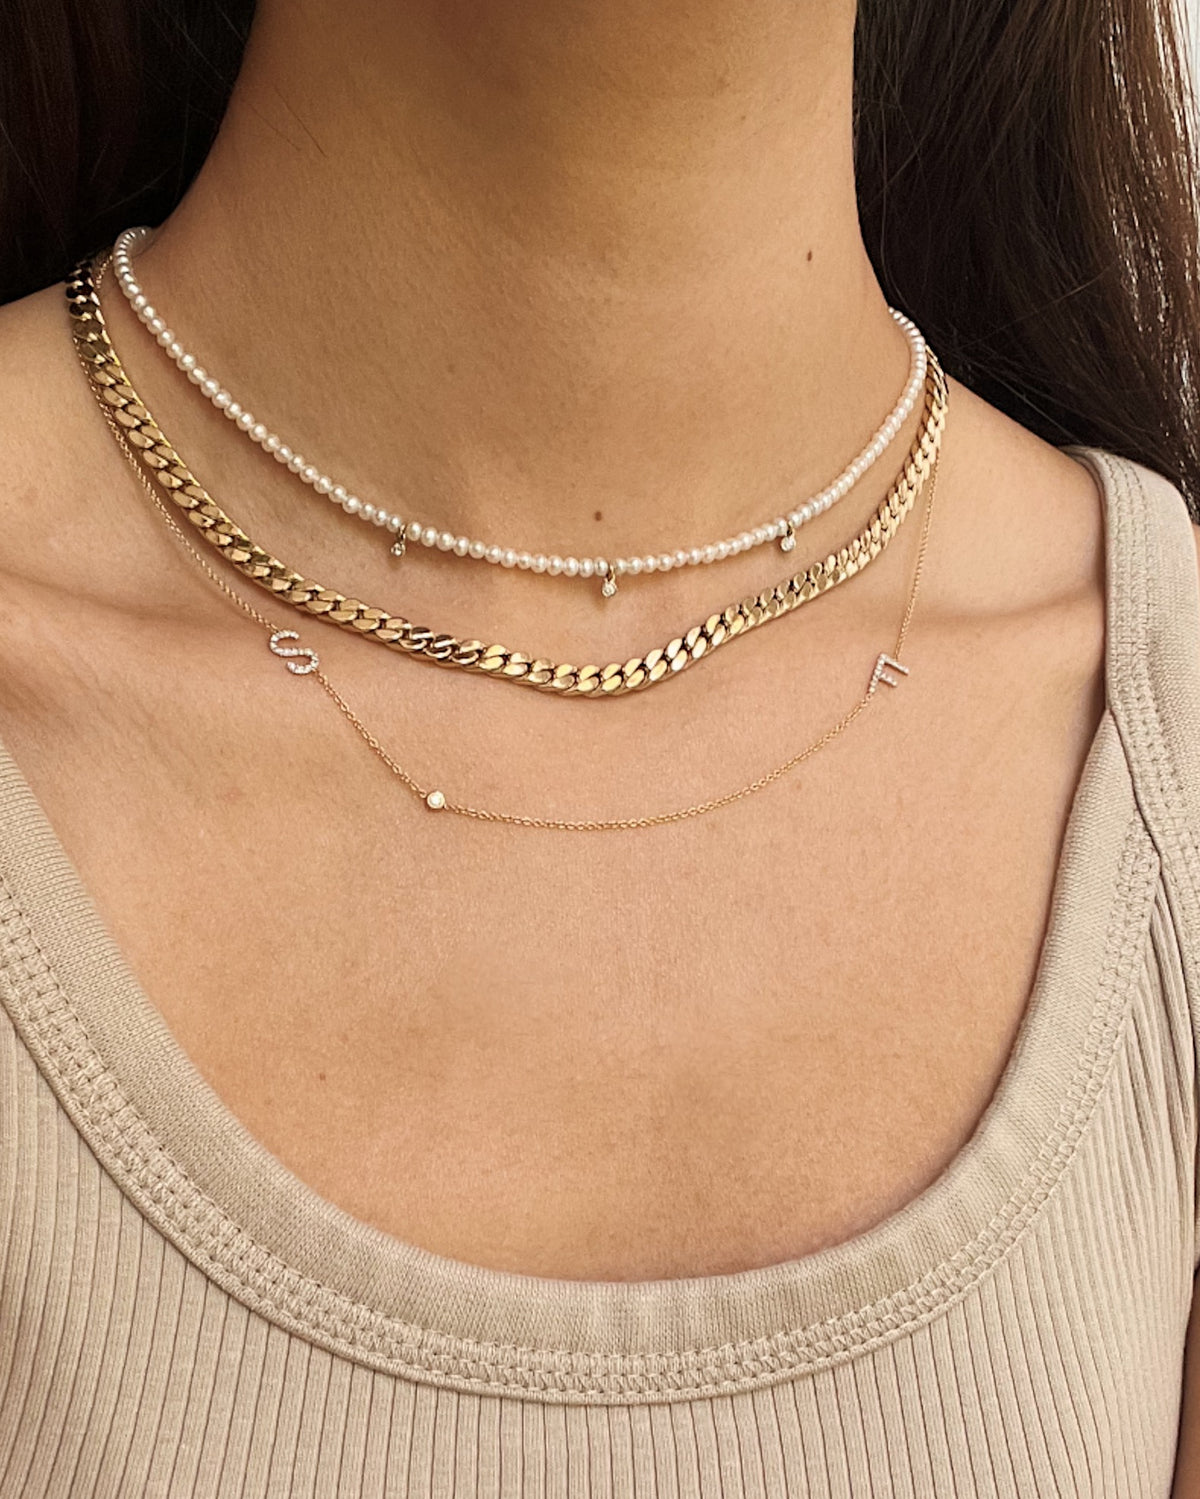 14K Gold Flat Curb Link Necklace - Out of Stock